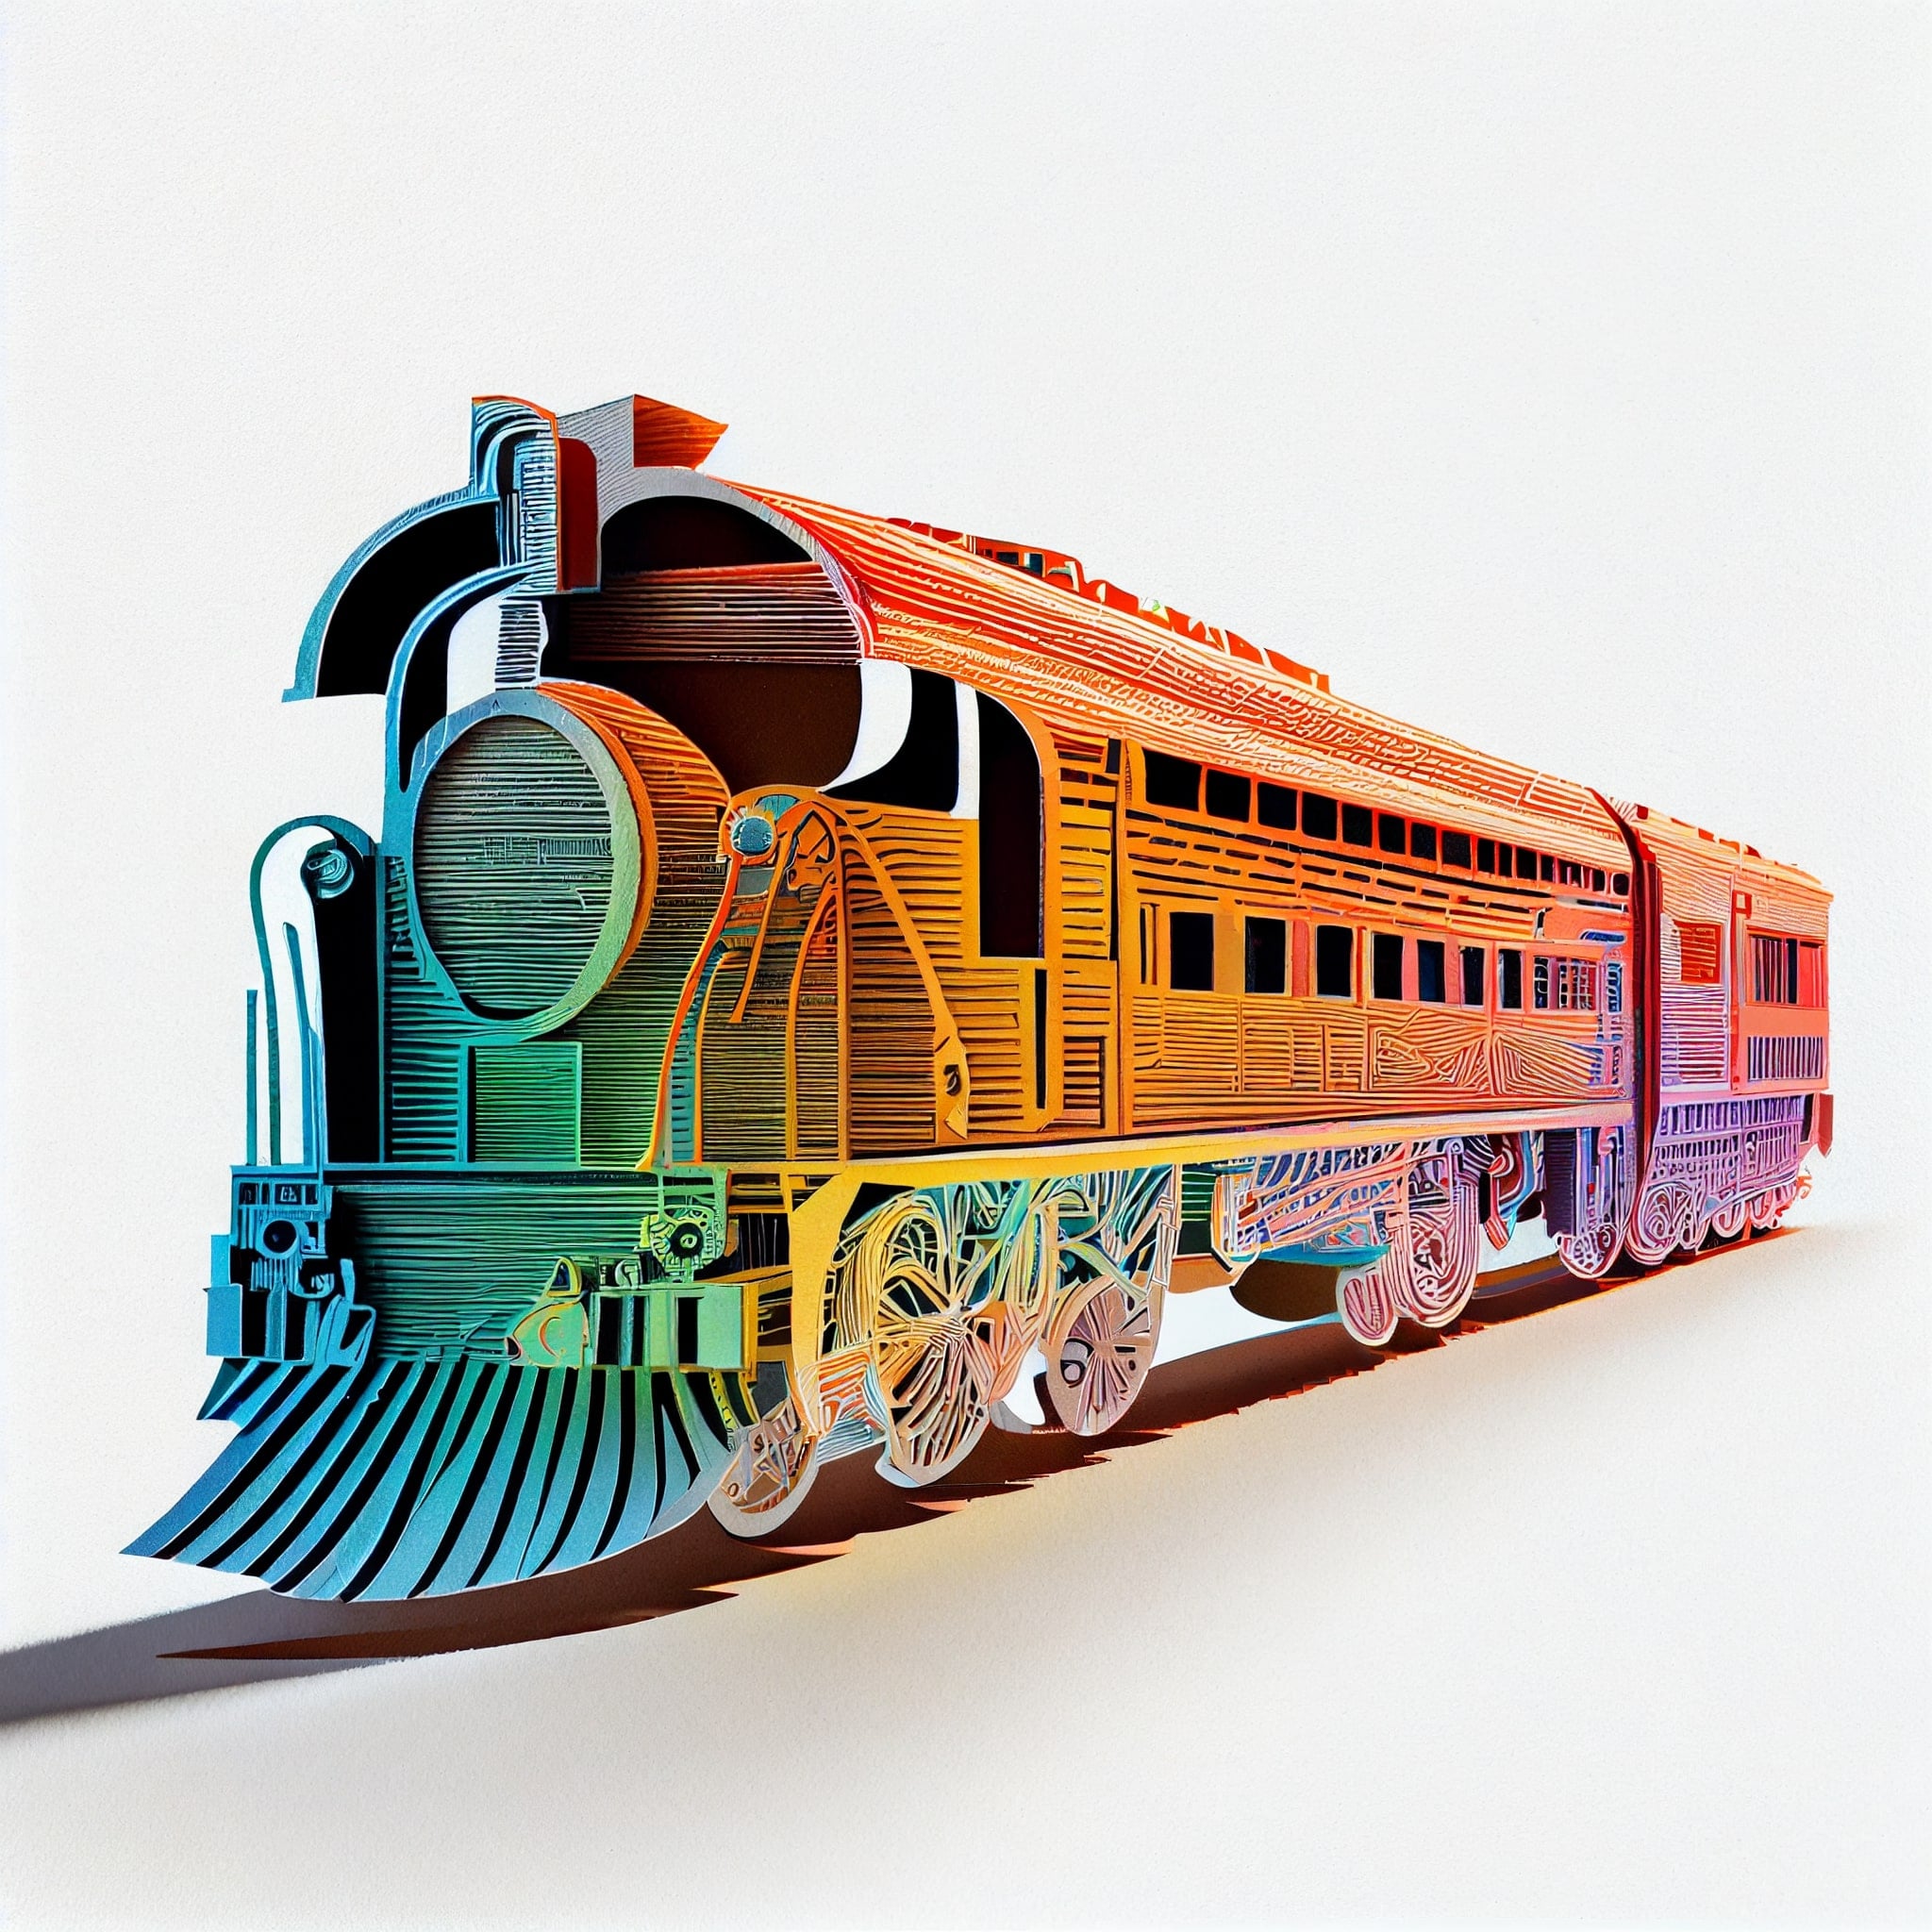 Multicolored train is shown on a white background.